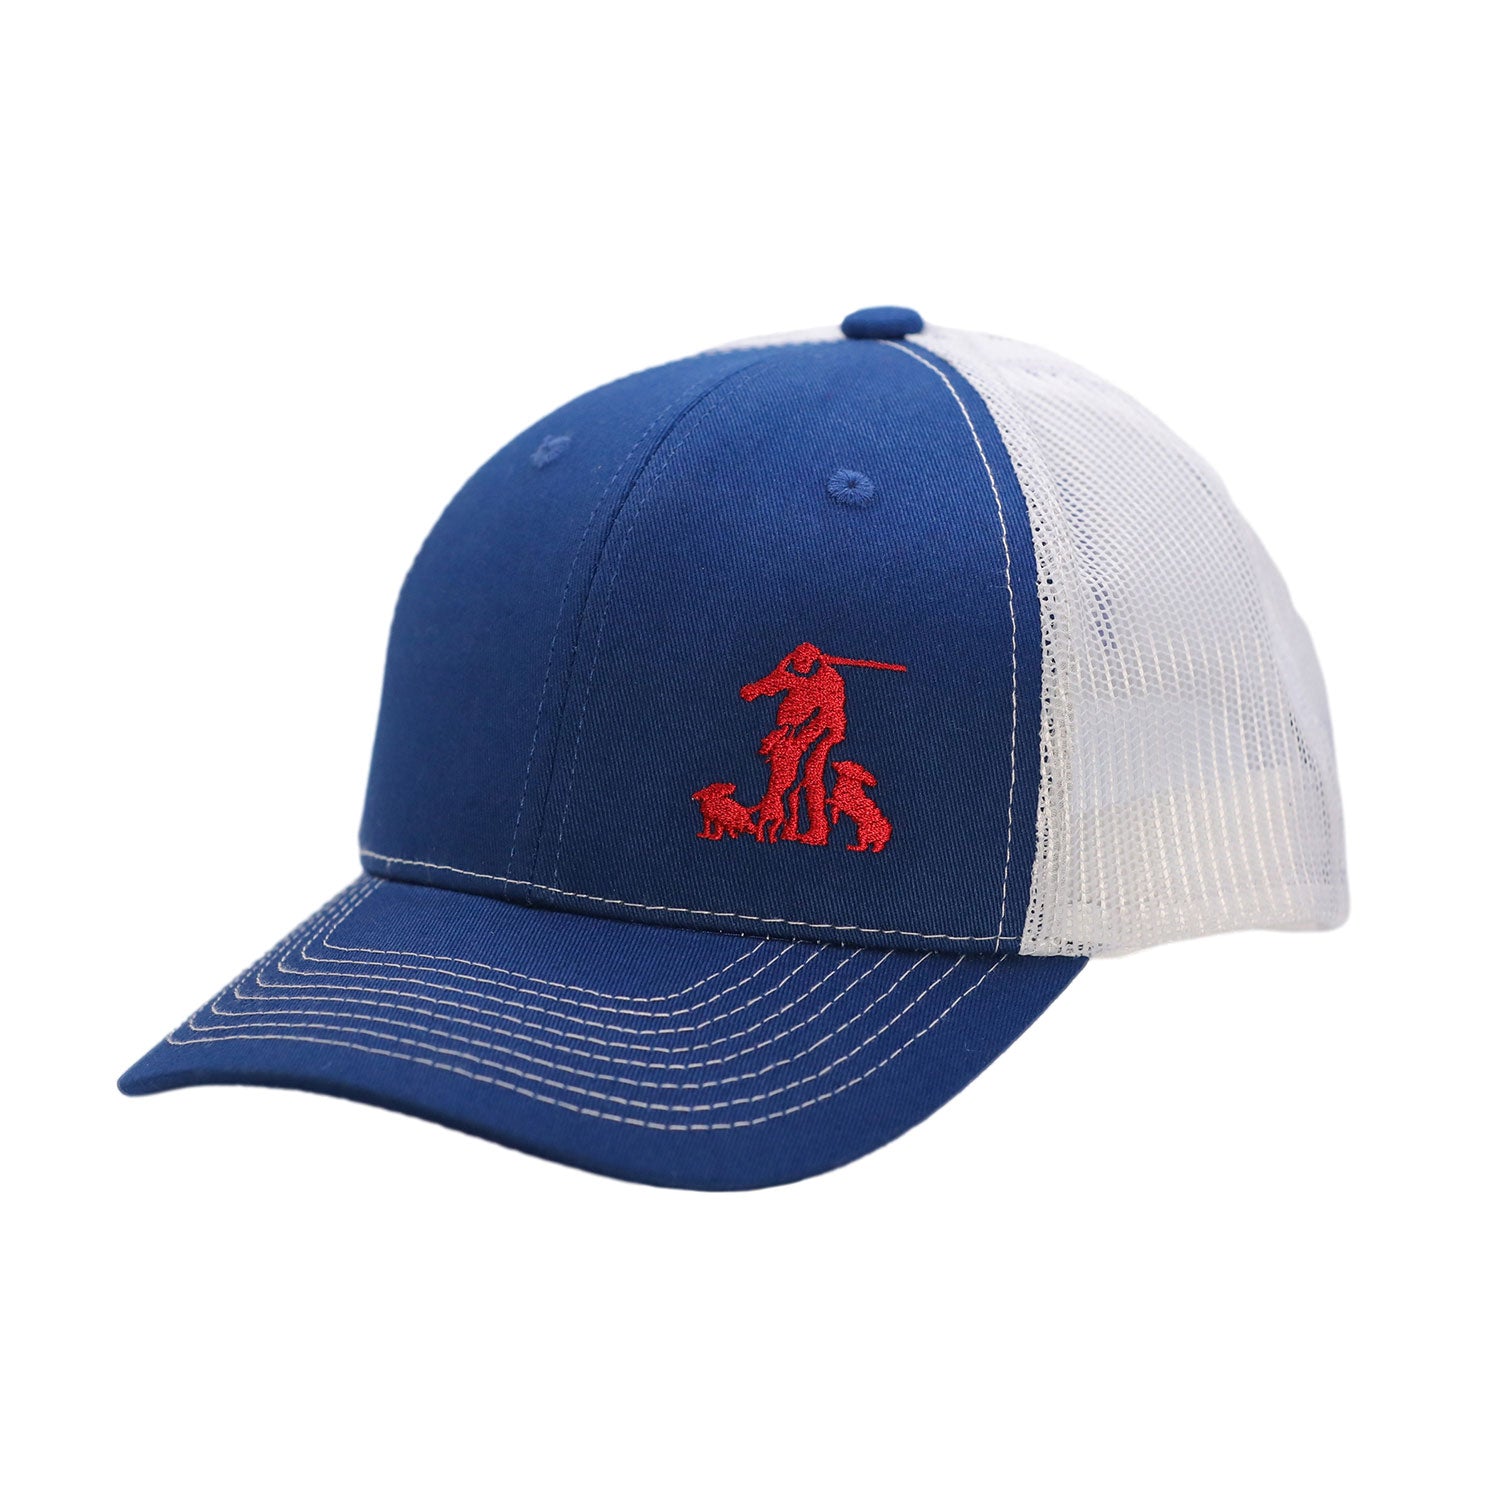 Ryglen Hat - Trucker Style Blue and white with red logo